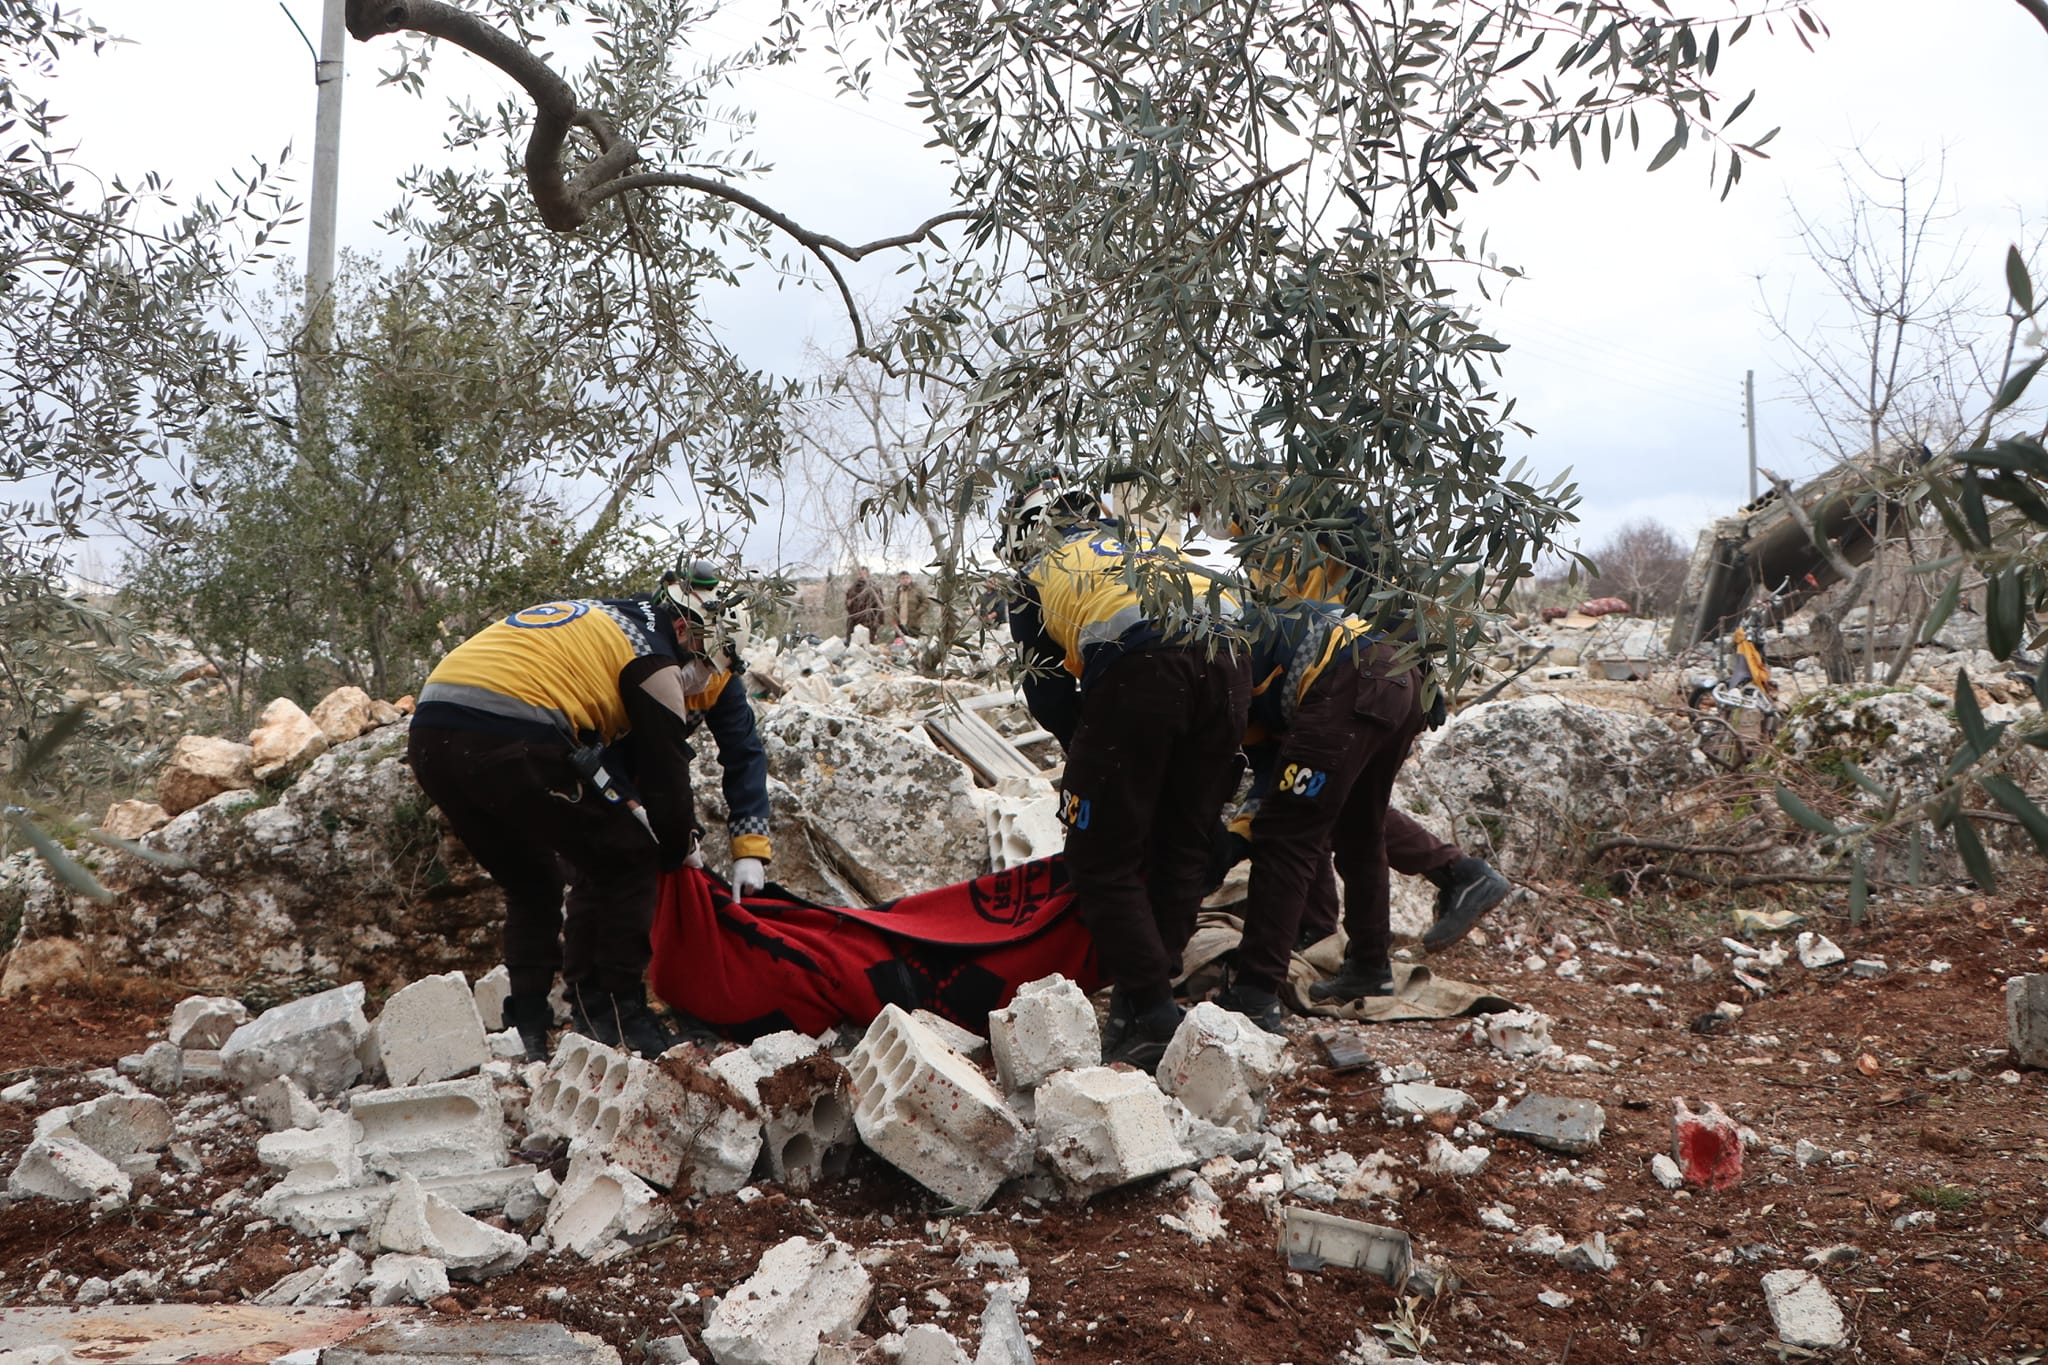 Two civilians killed by the explosion of munitions’ remnants south of Idlib governorate on 24-1-2022